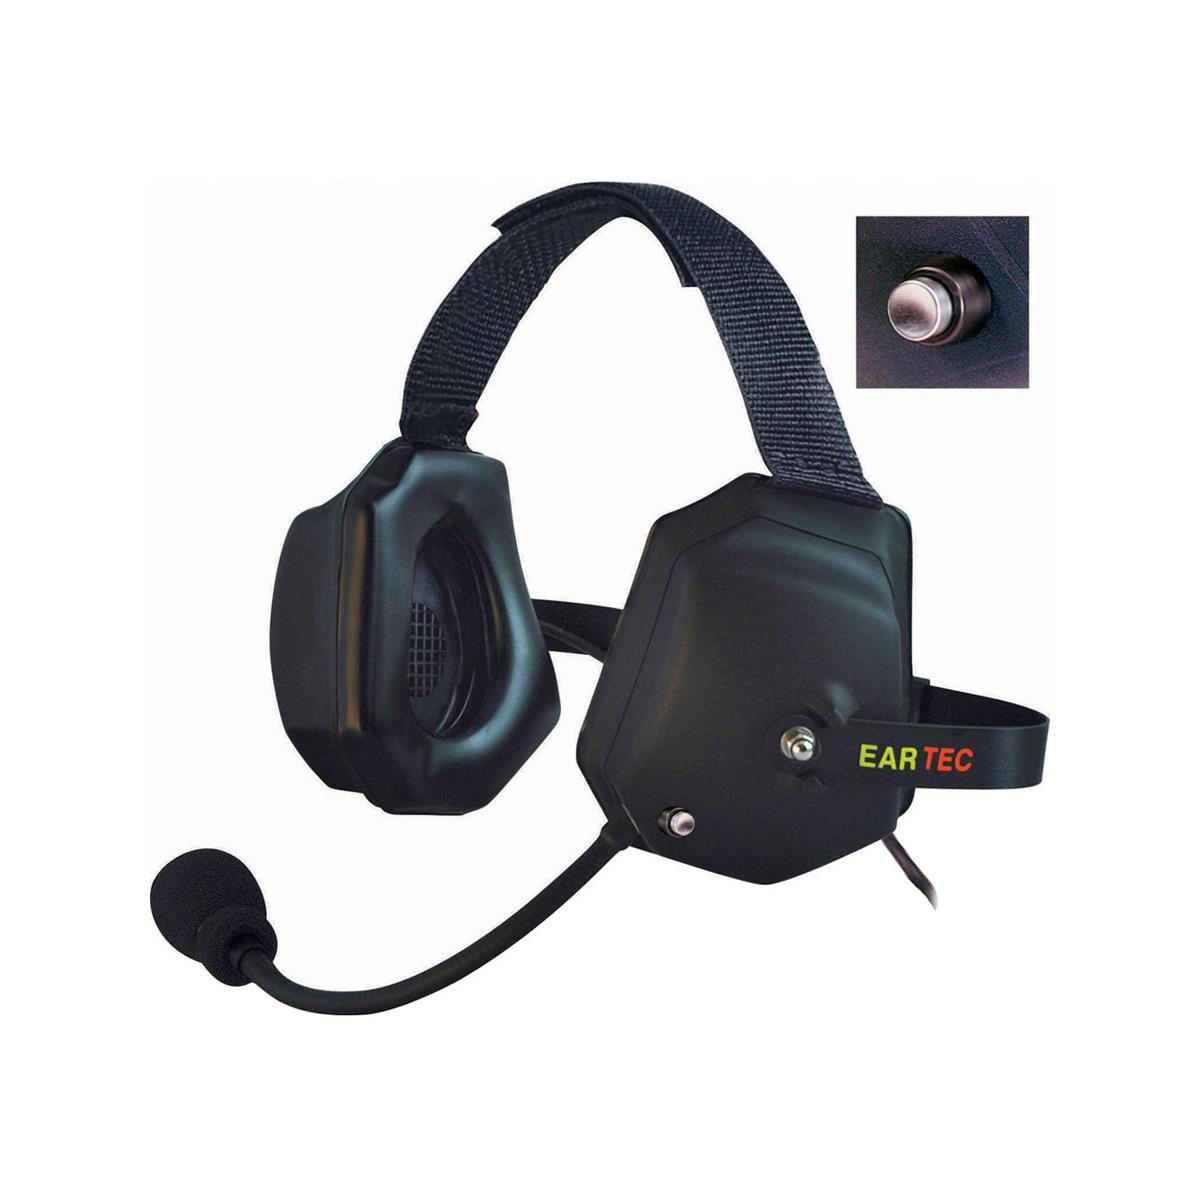 Image of Eartec XTreme 2Ear Shell Mount PTT Headset with Mic for SC-1000 Transceiver